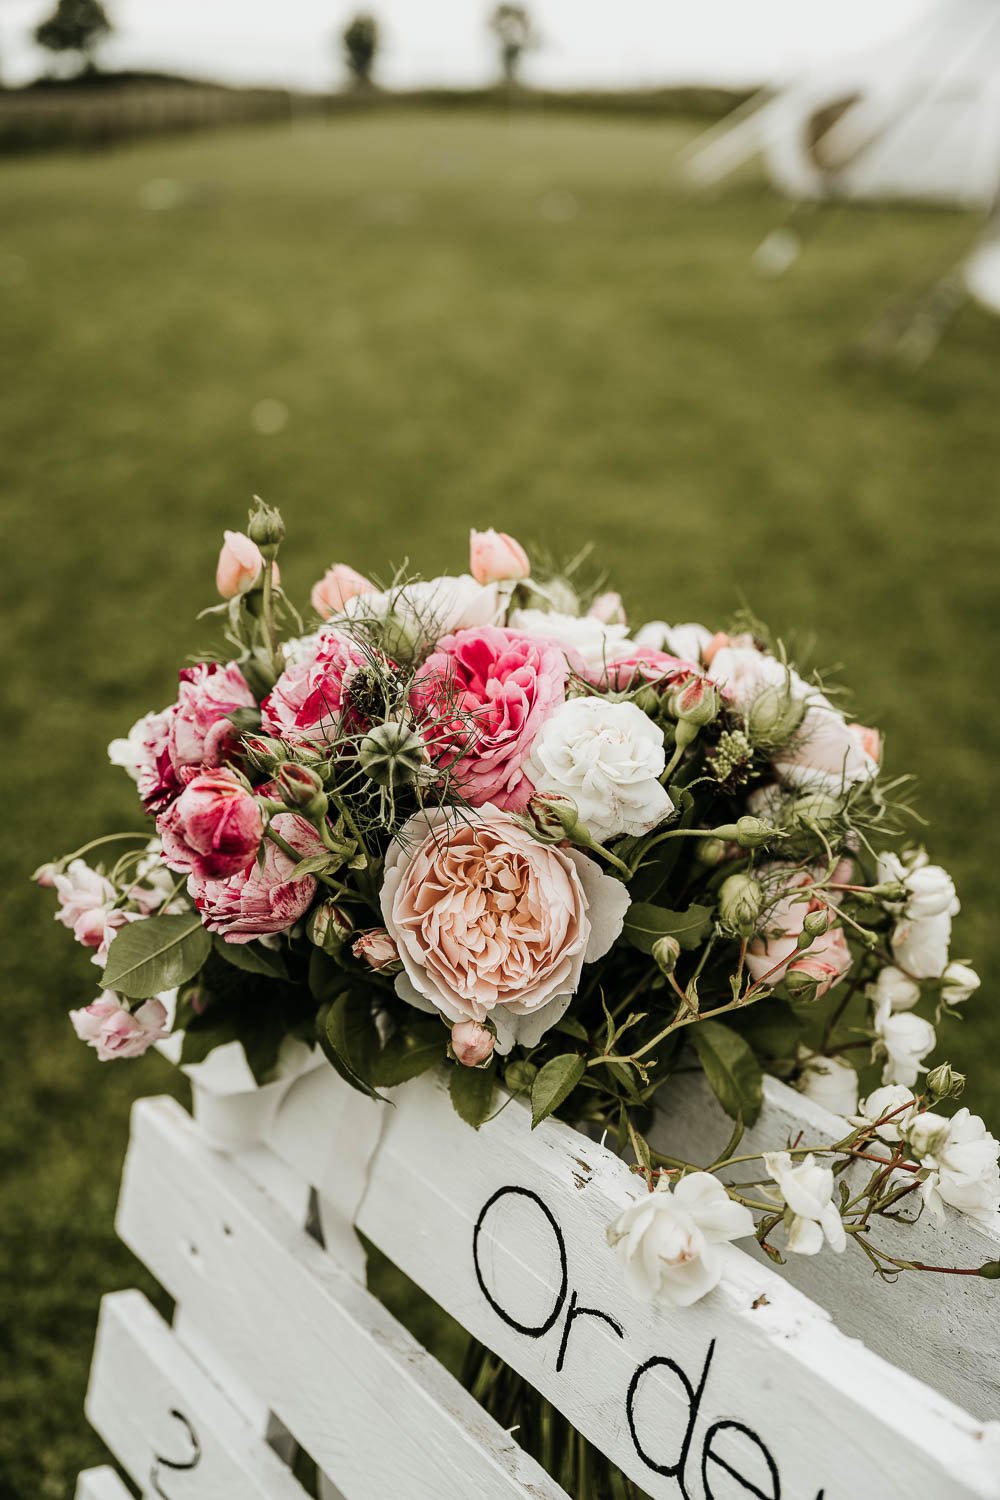 Bouquet of wedding flowers placed on a white rustic wooden pallet decor.